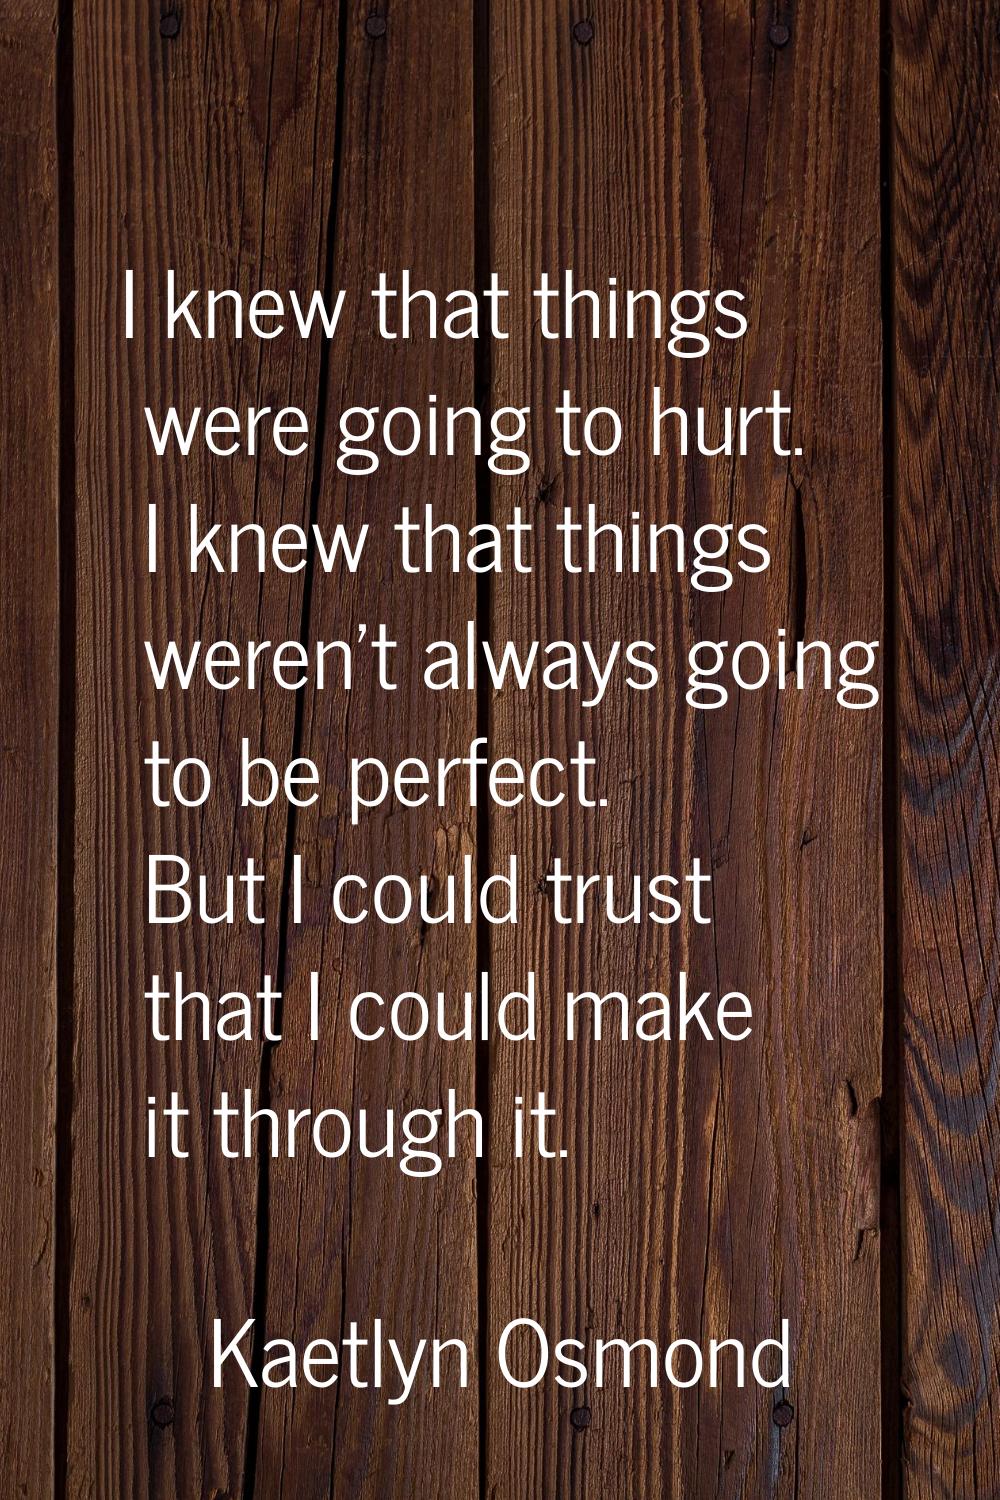 I knew that things were going to hurt. I knew that things weren't always going to be perfect. But I